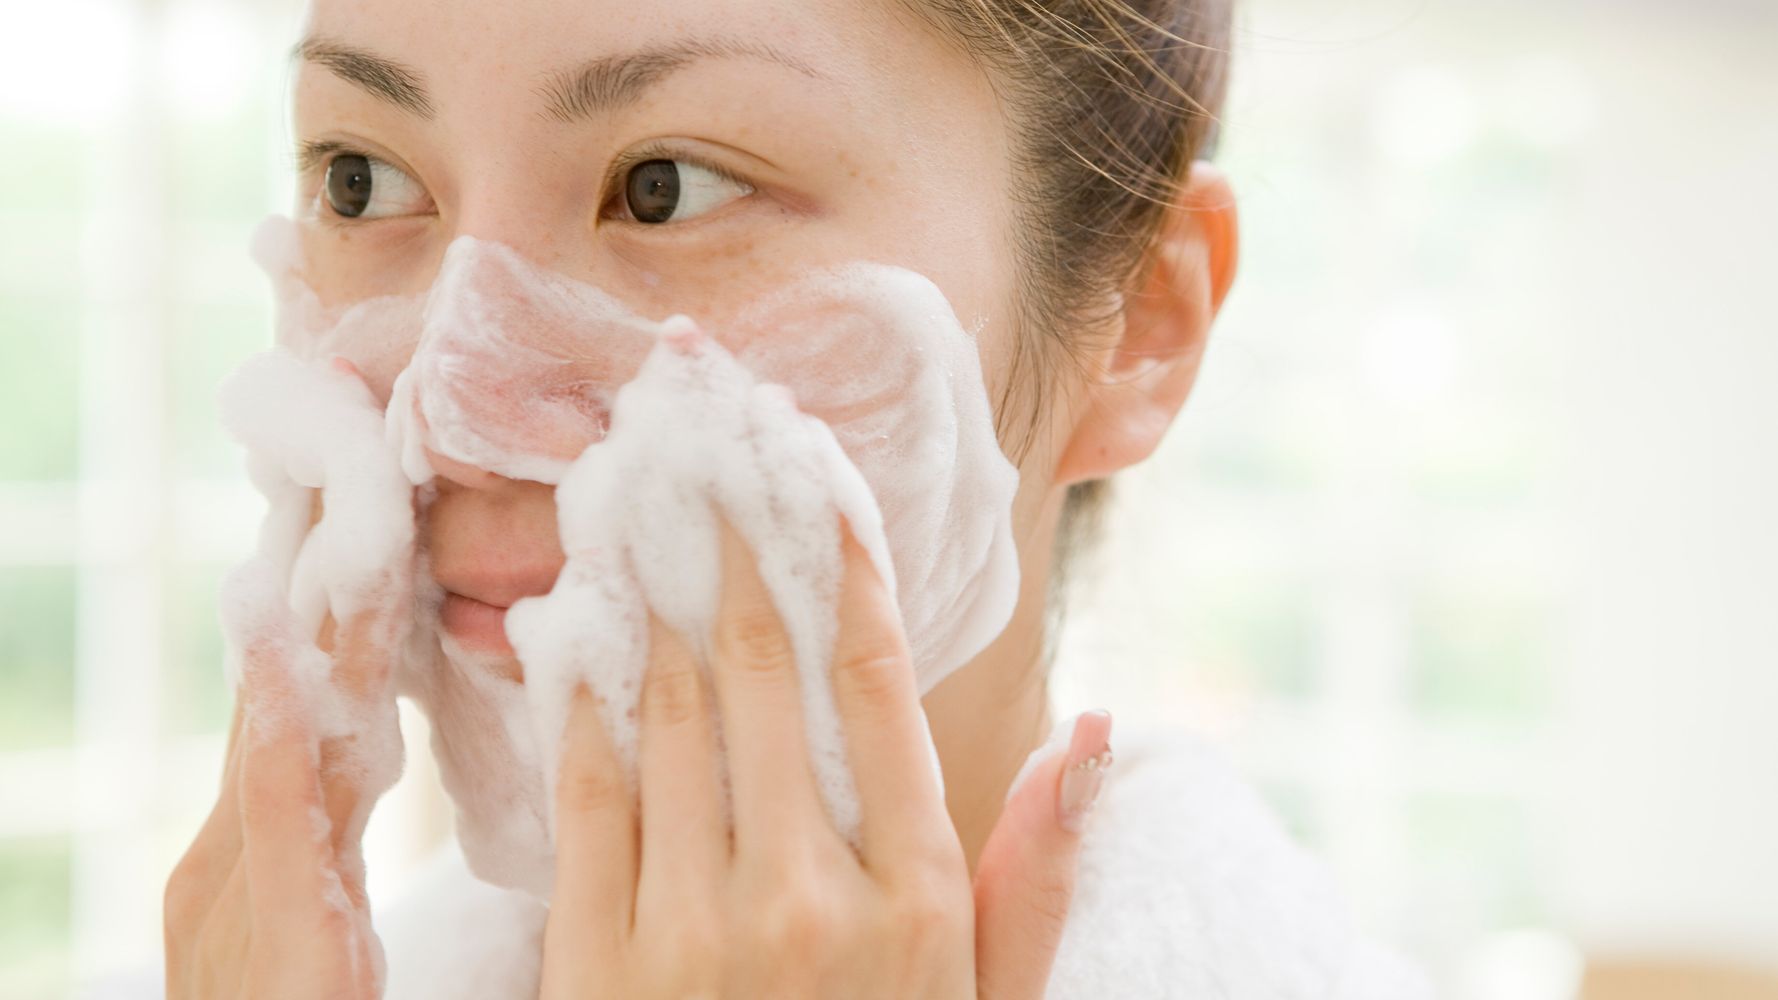 Face Washes And Cleansing Products That Won’t Make Your Skin Feel Dry